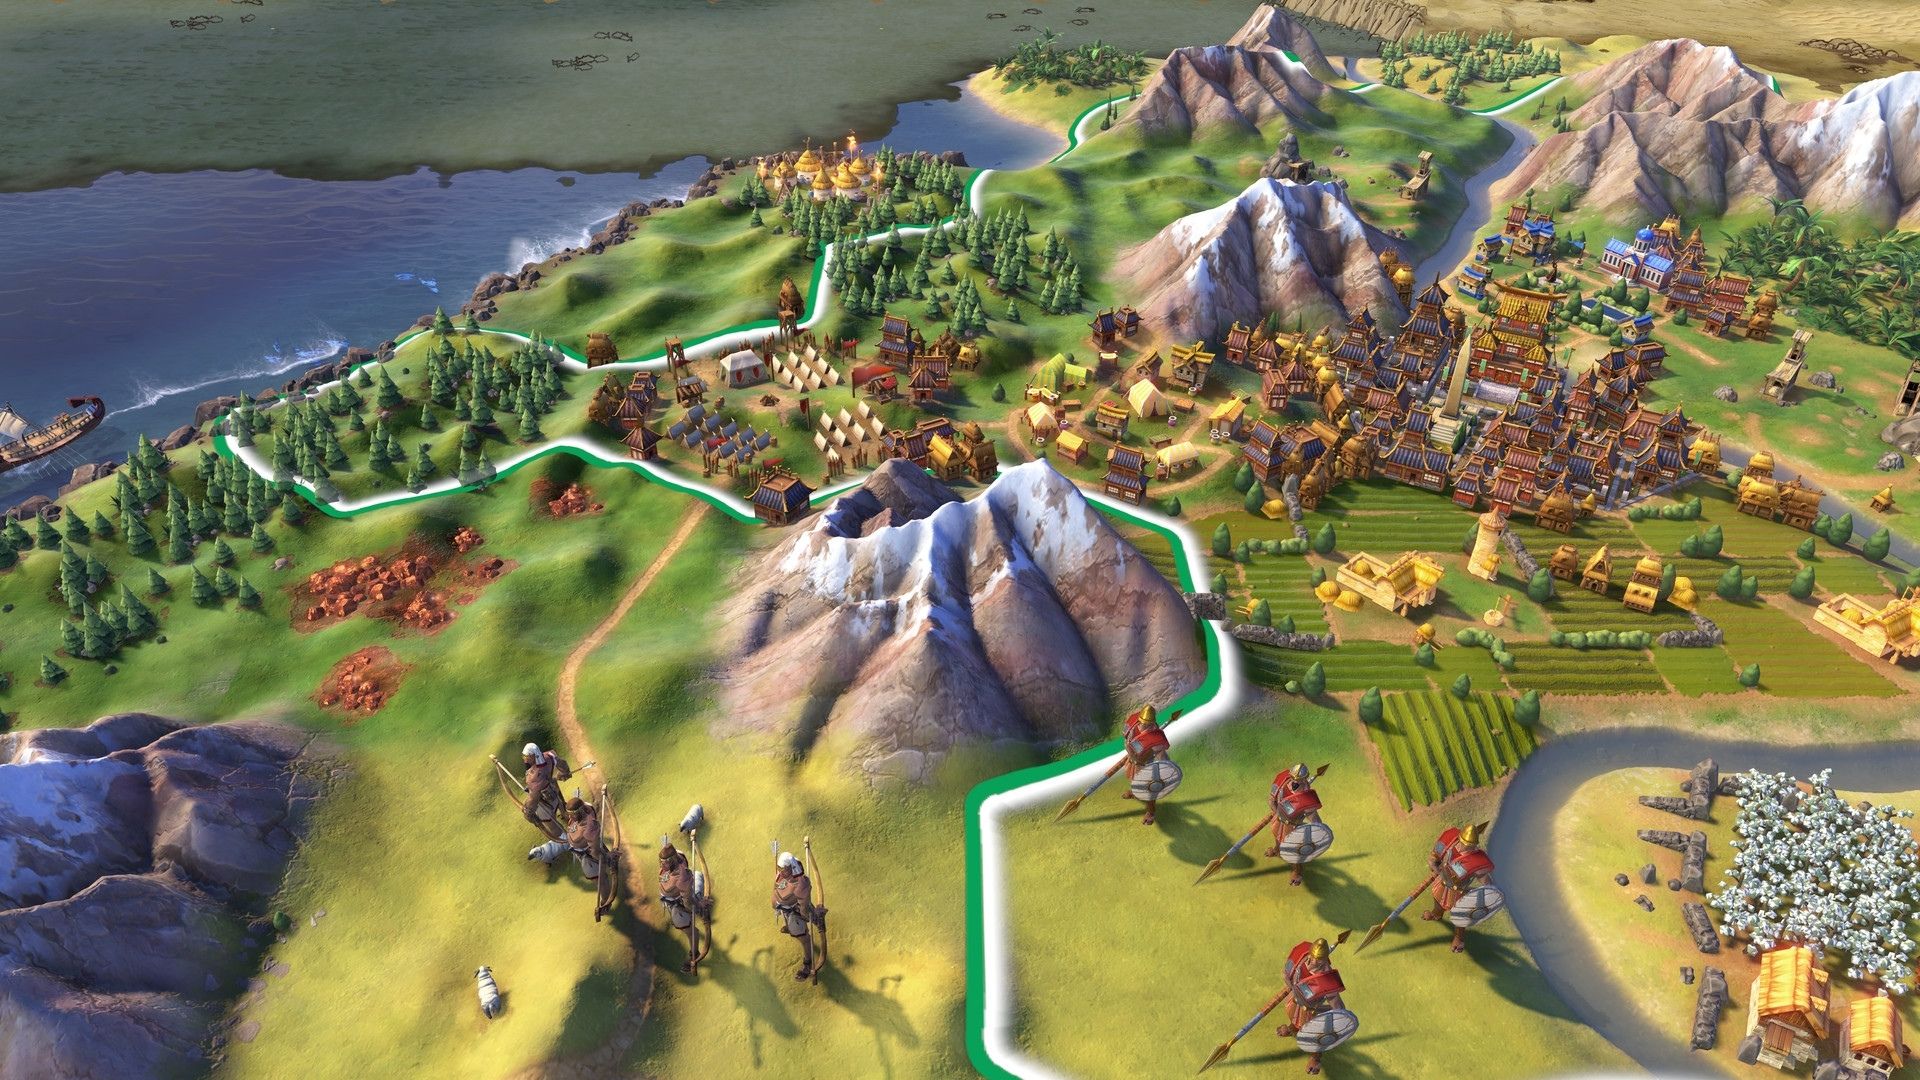 A screenshot from Civilization VI, showing giant soldiers on a zoomed out overworked map.